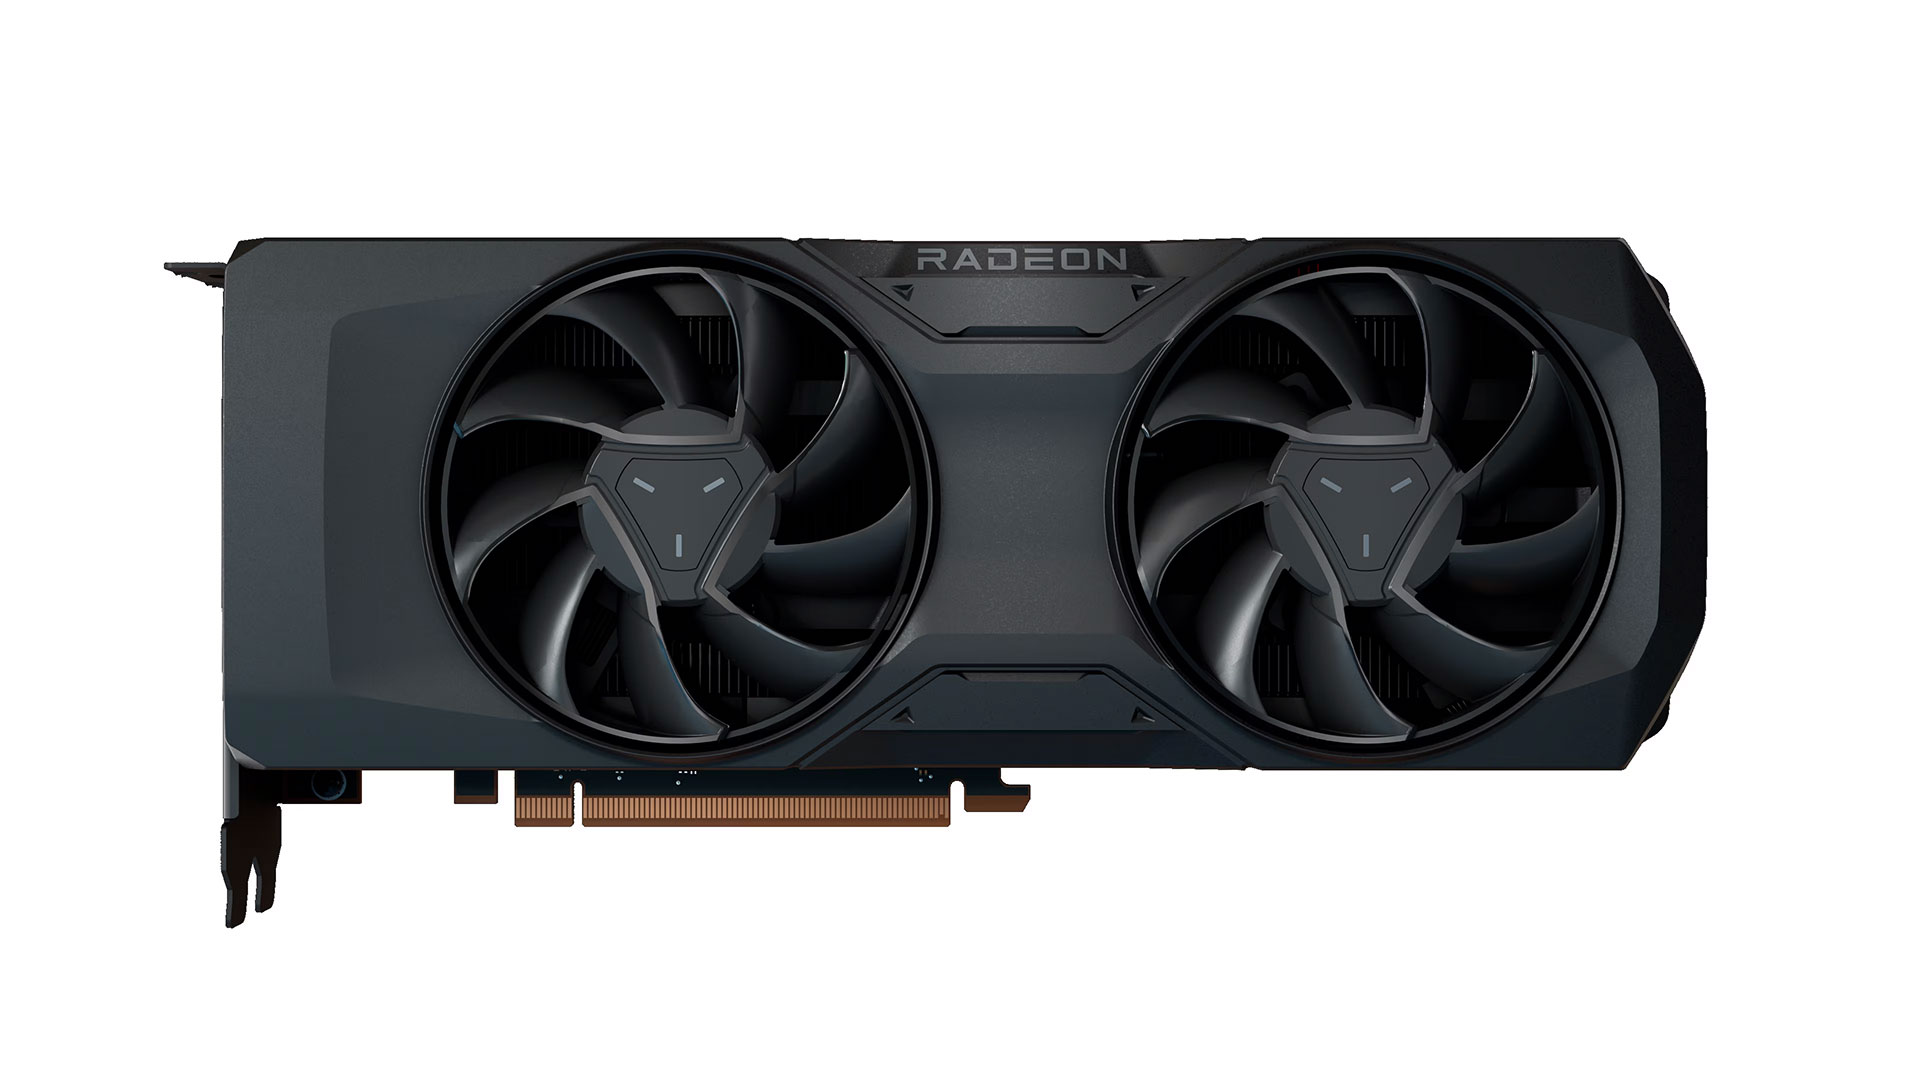 AMD has unveiled the Radeon RX 7700 XT and RX 7800 XT graphics cards